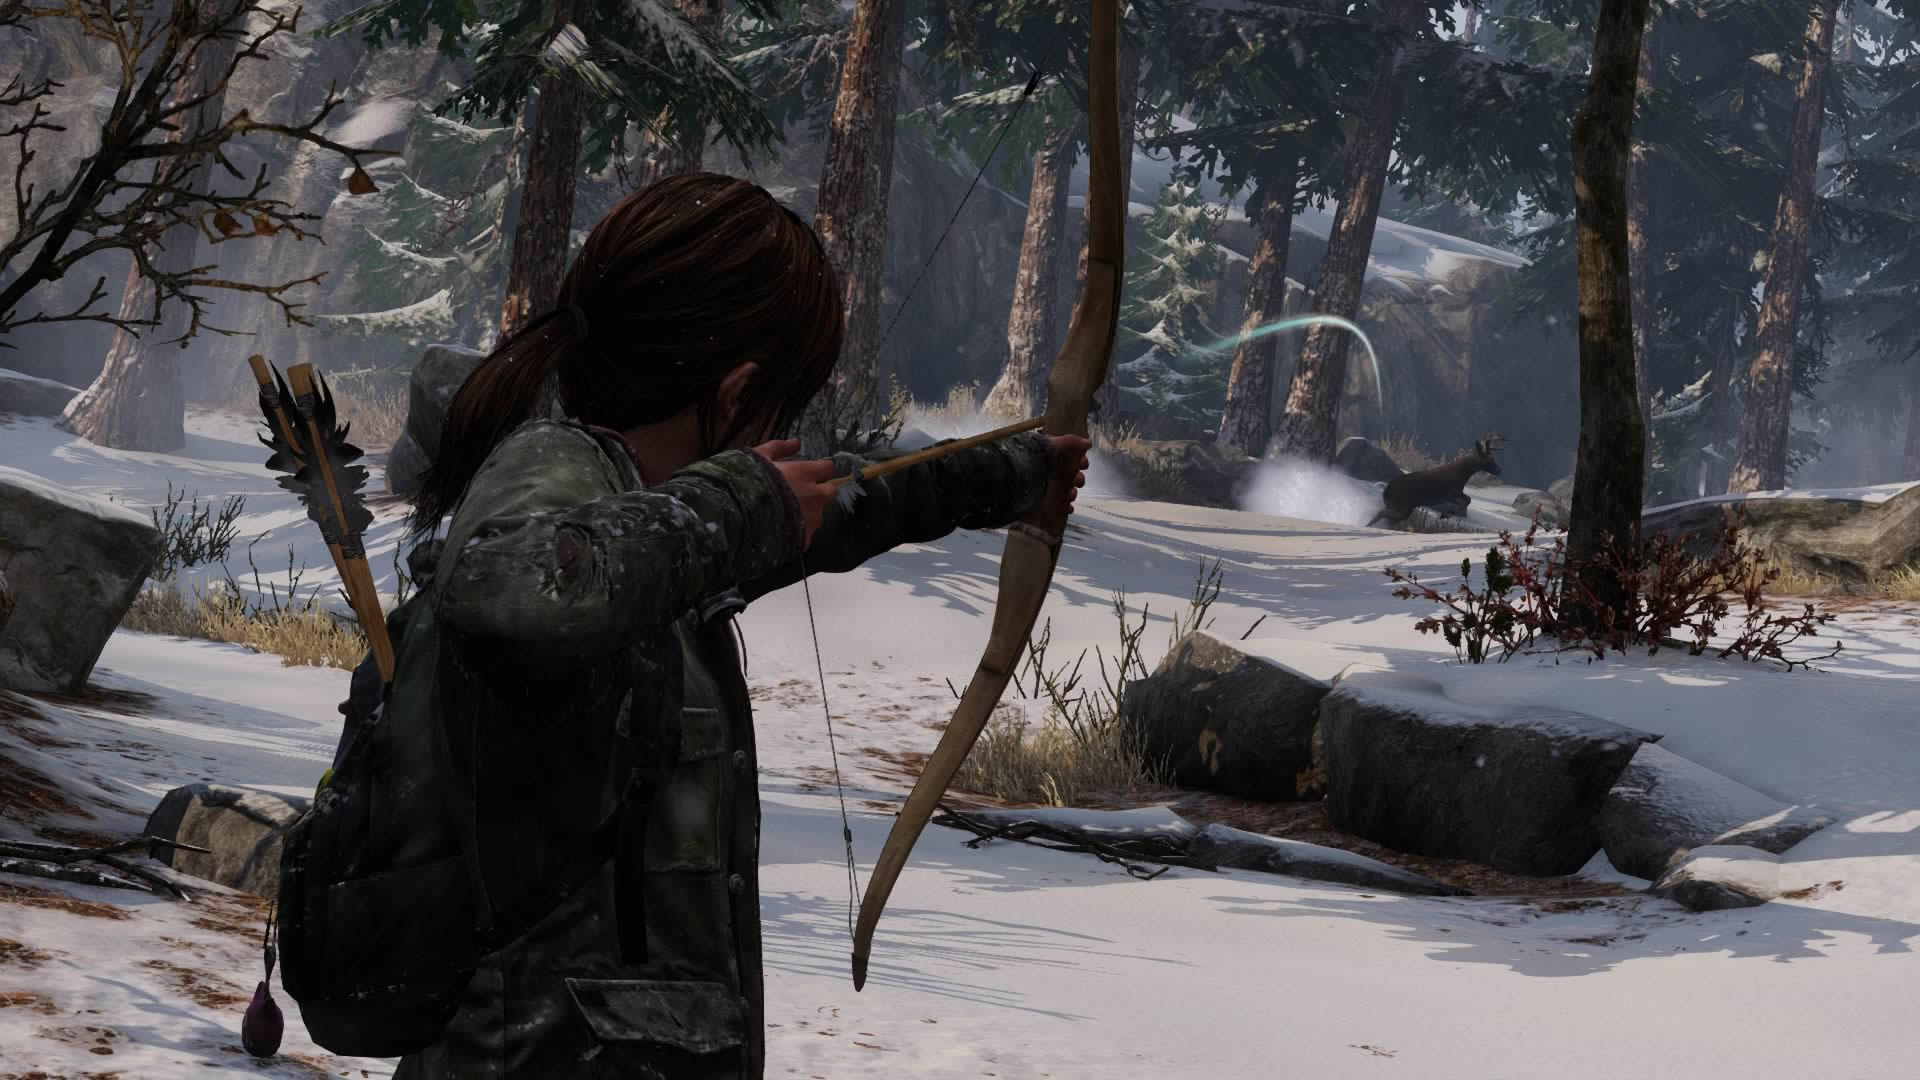 Ellie from The Last of Us drawing a bow and arrow